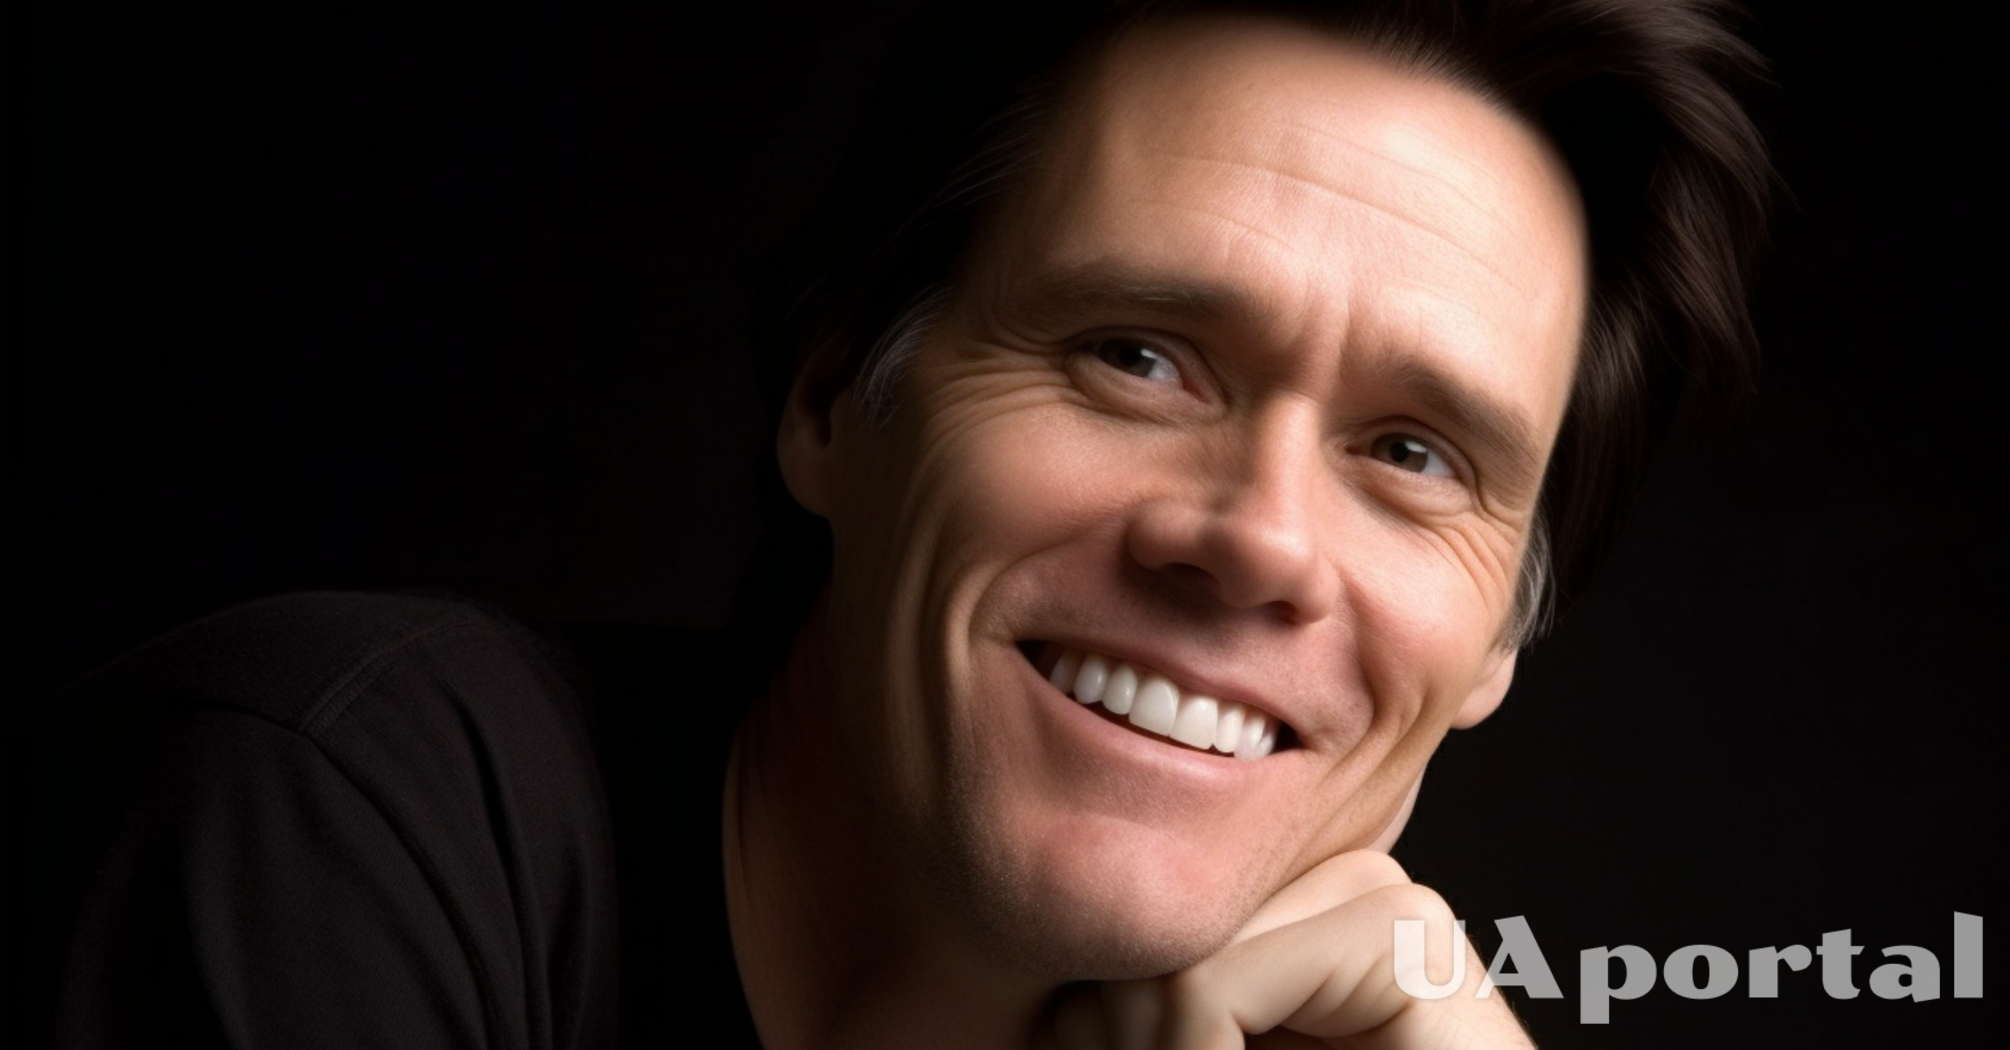 Why Everyone Loves Jim Carrey: A Success Story